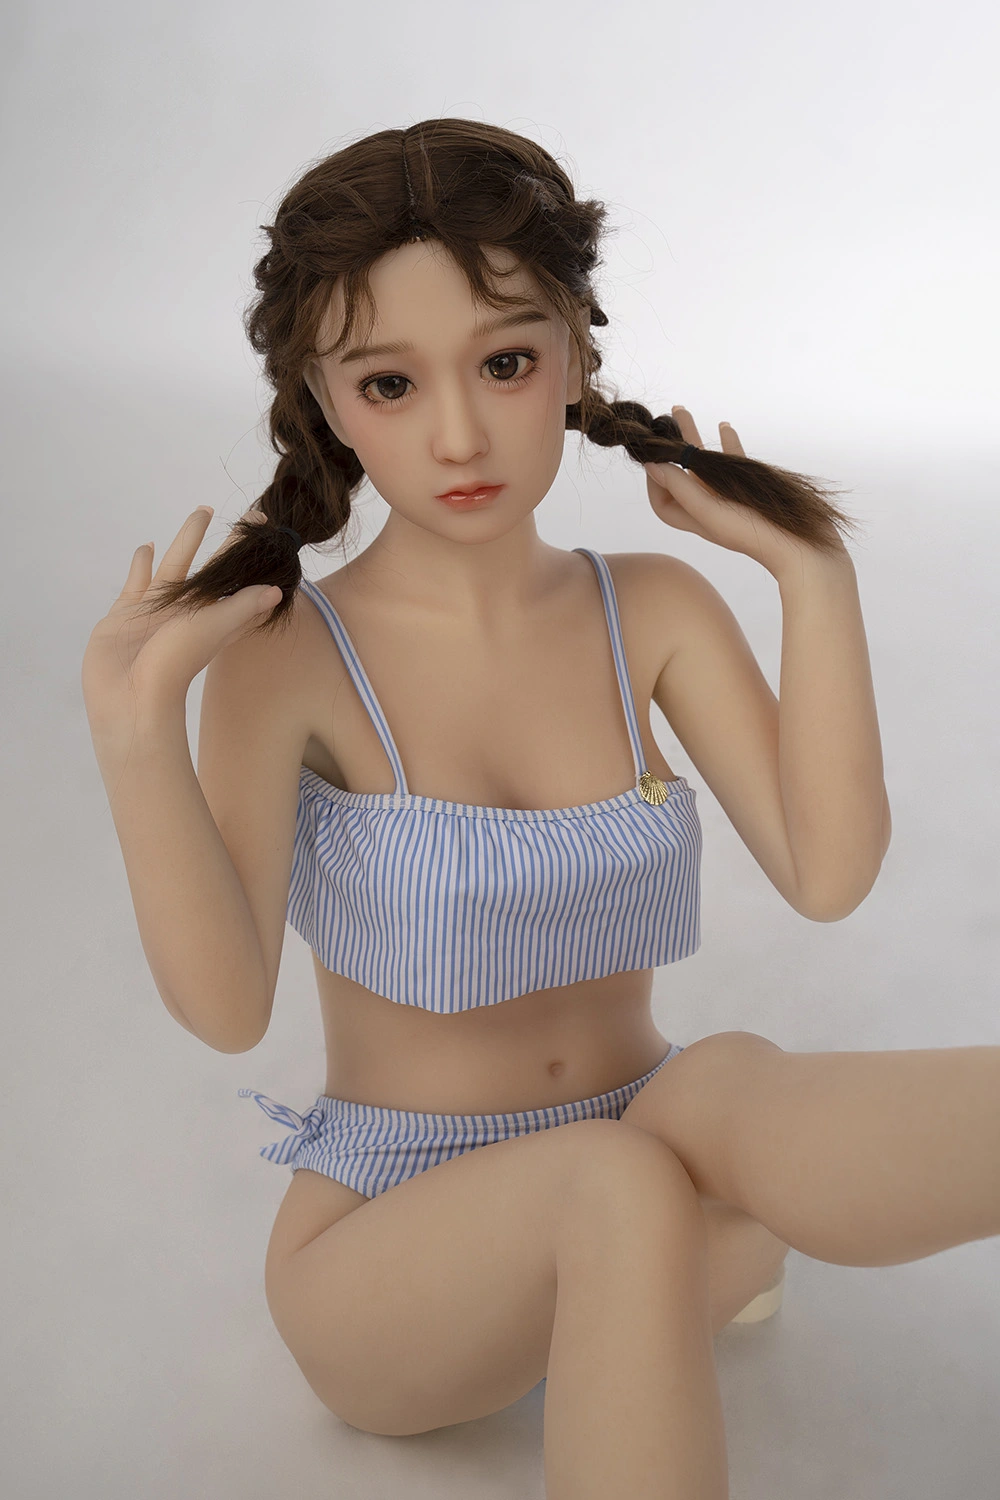  mixed-race style TPE adult doll